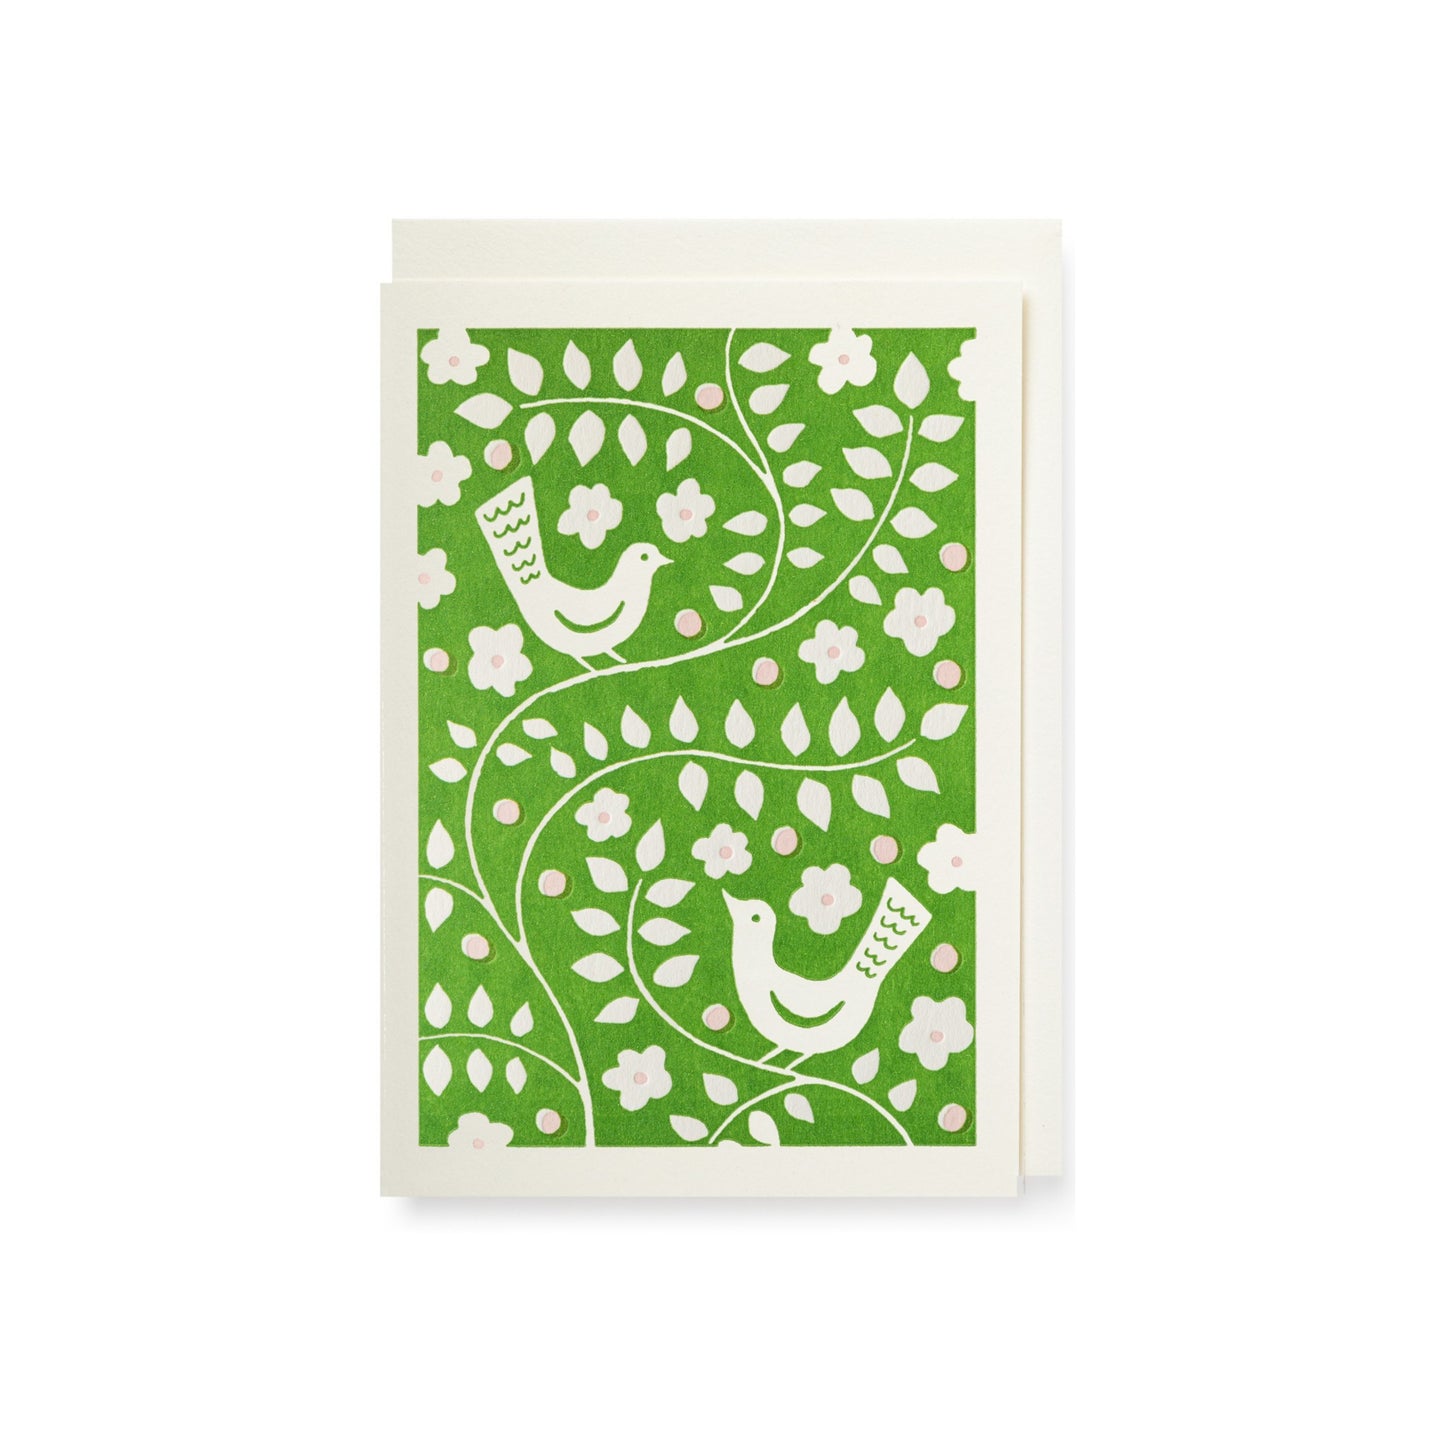 small greetings card with green bird and flowers design by Archivist Gallery